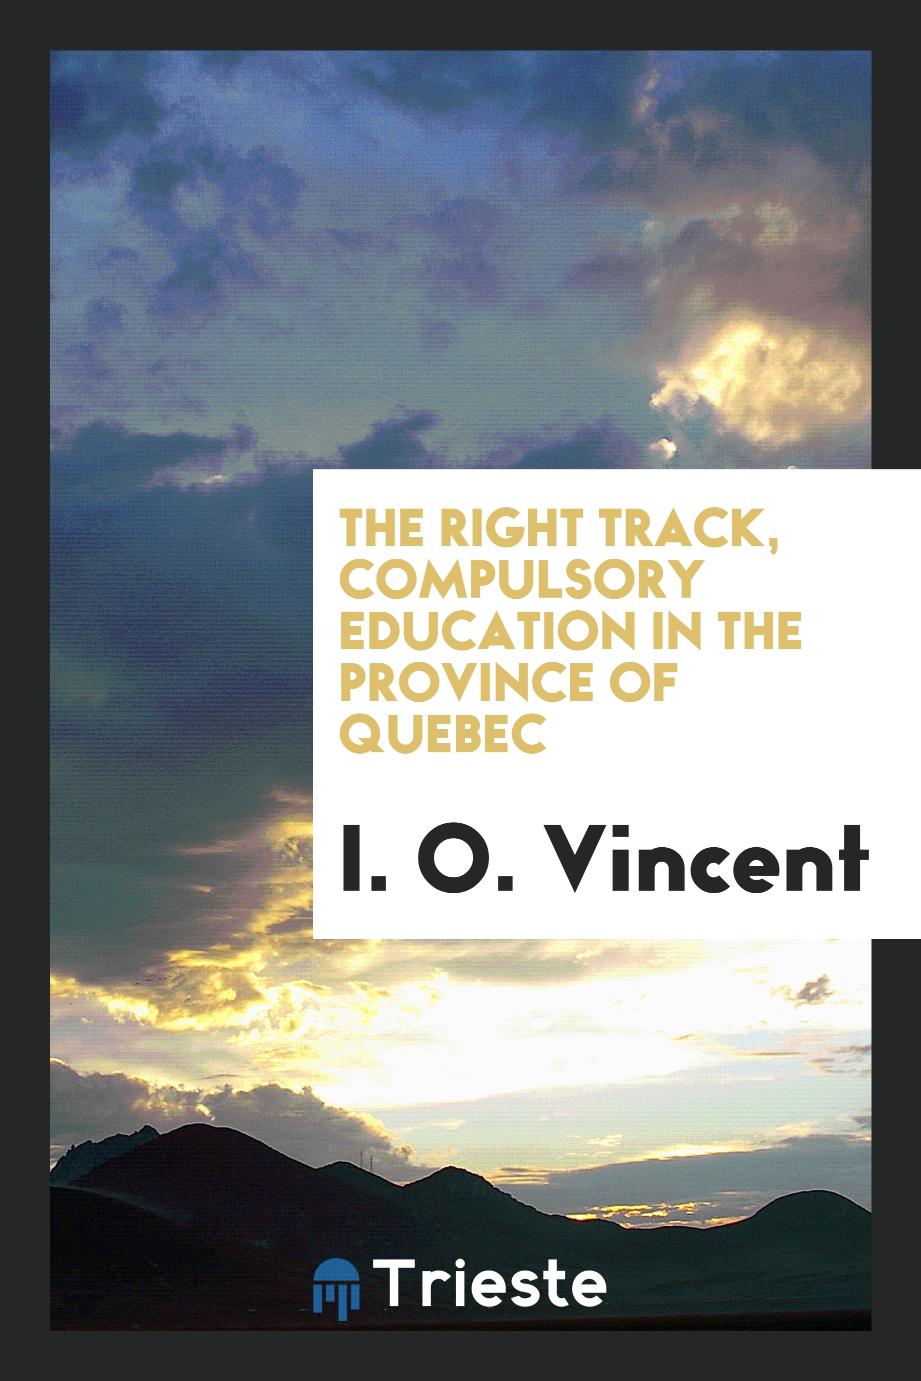 The right track, compulsory education in the Province of Quebec